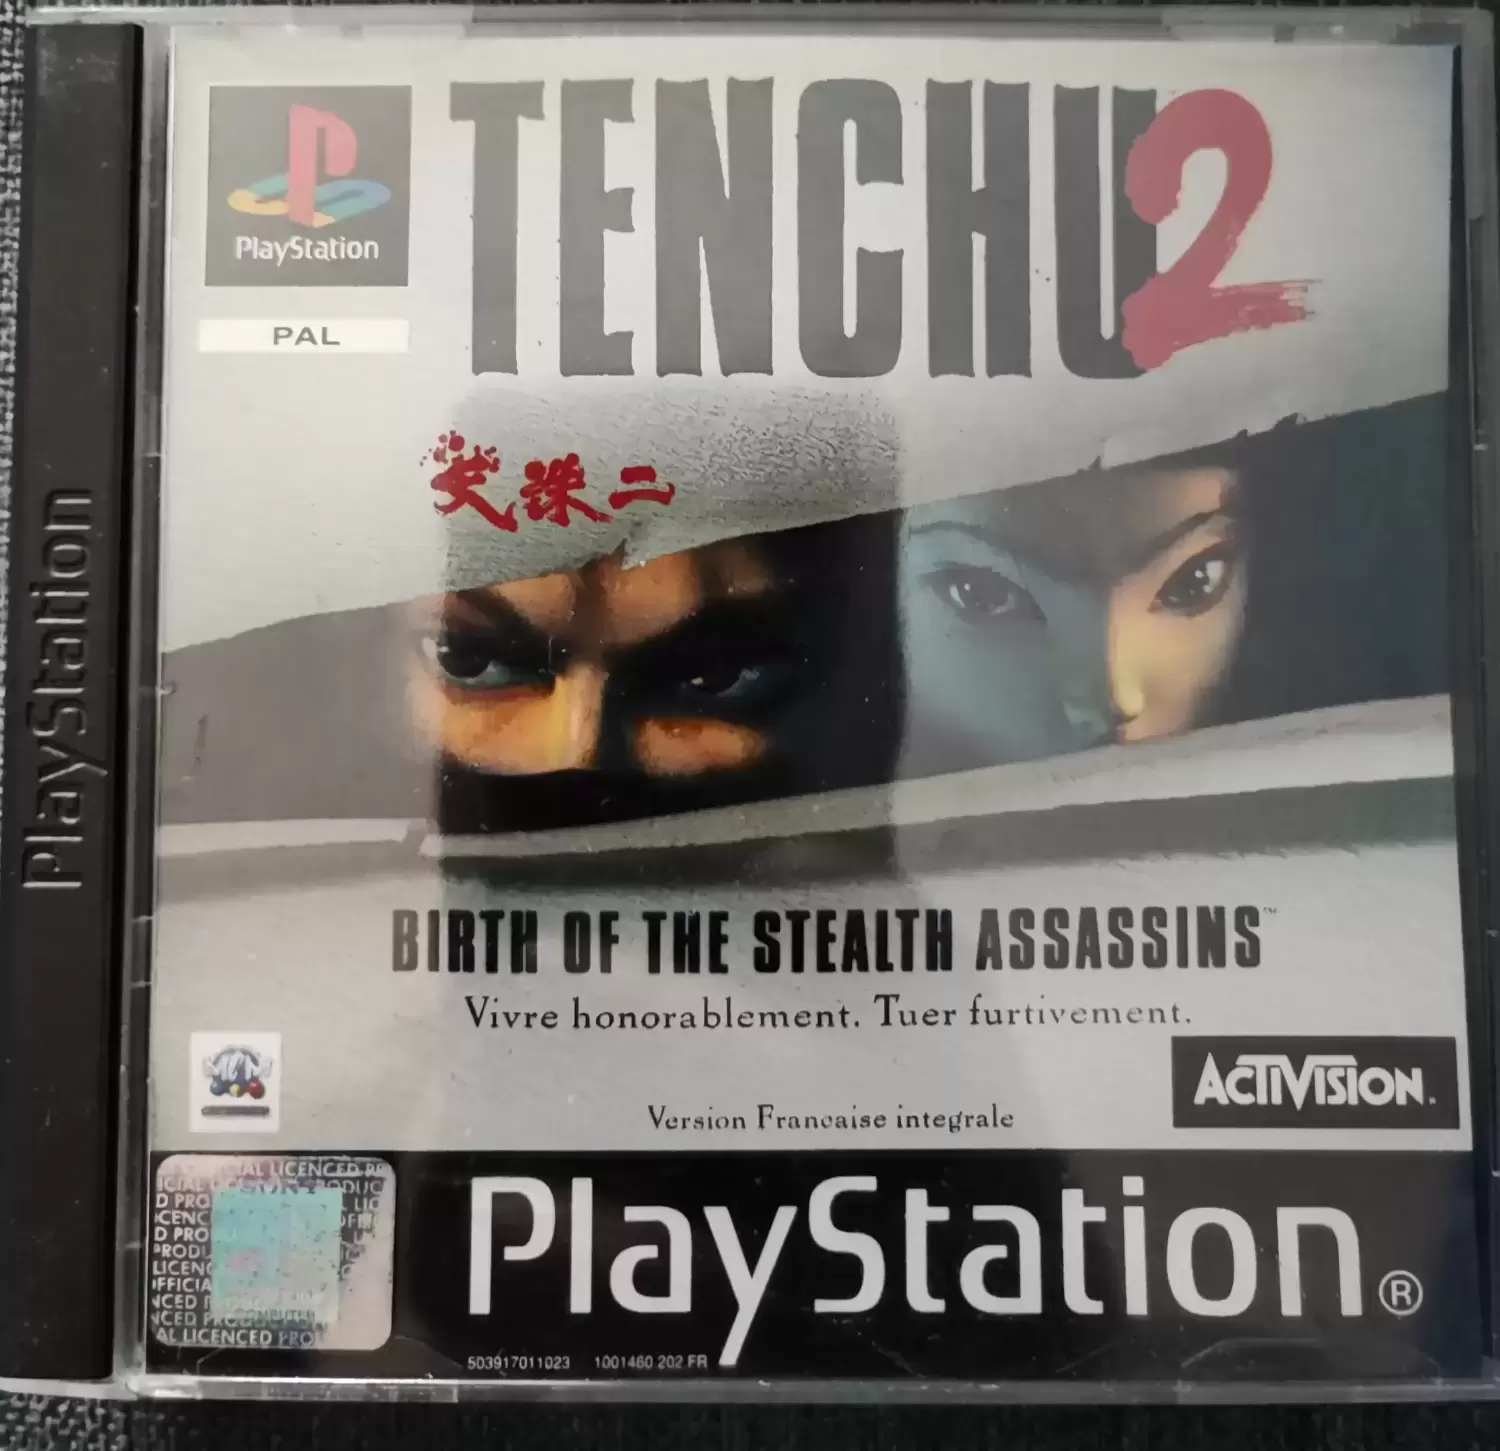 Playstation games - Tenchu 2 : Birth of the Stealth Assassins